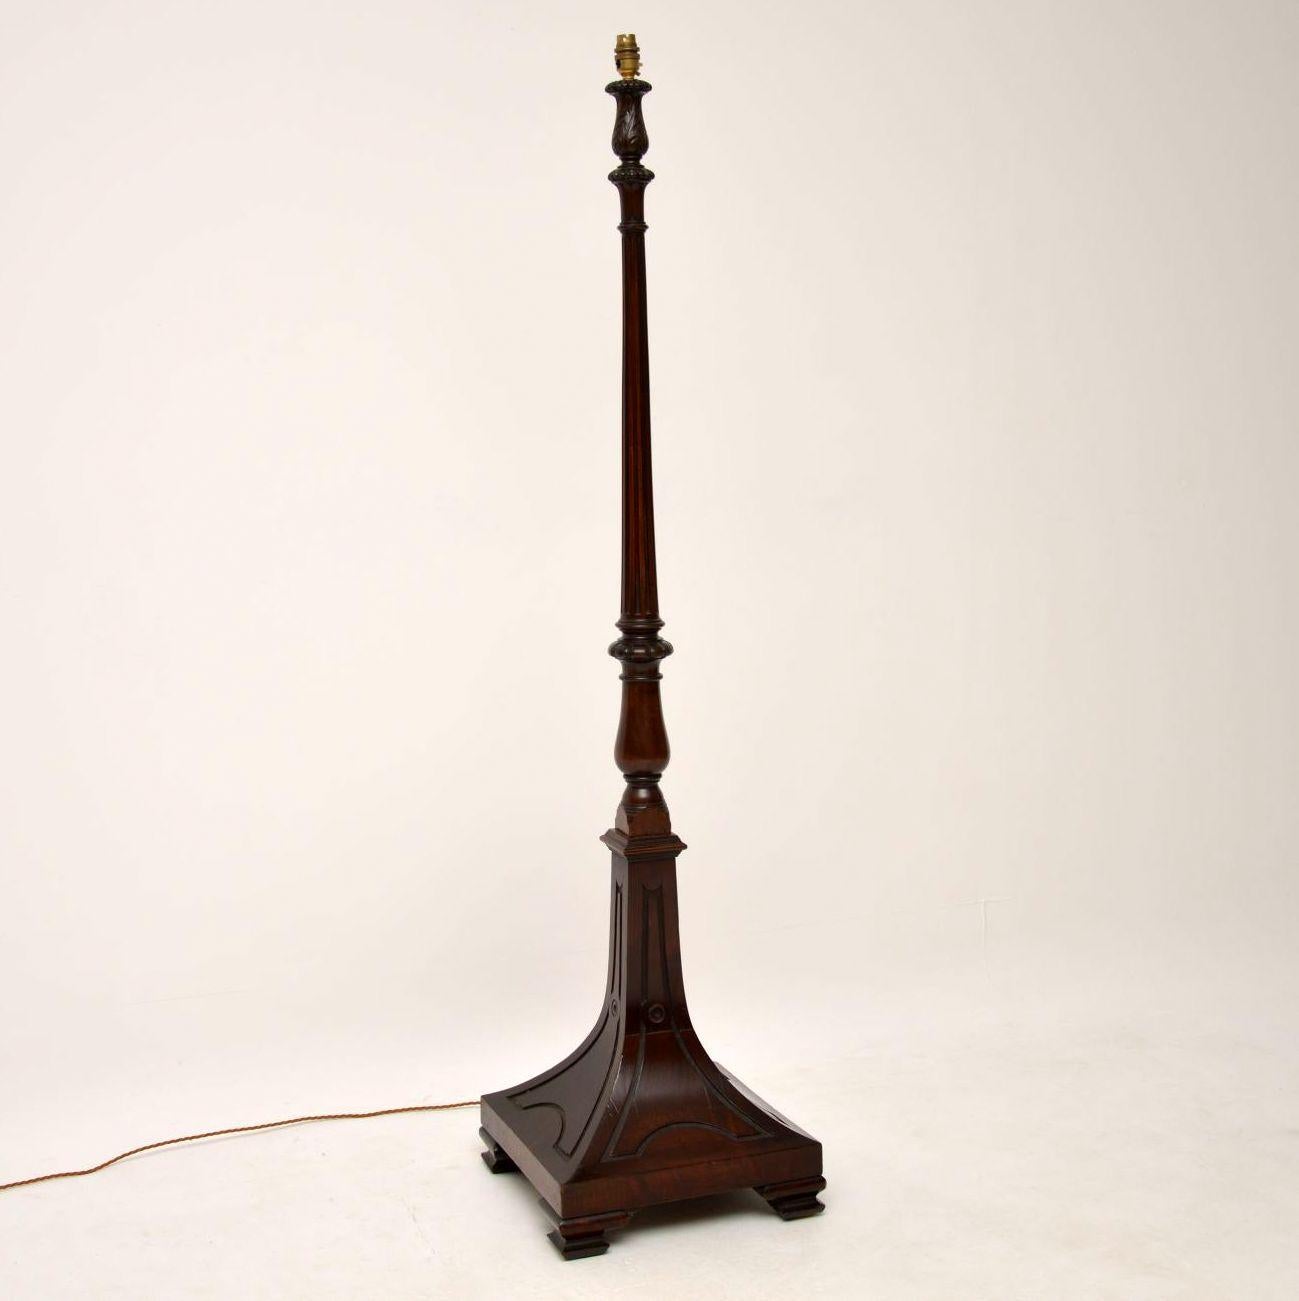 Antique Victorian mahogany floor lamp in good condition which has just been re-wired. It has a strong looking curved out square base with some interesting decoration and sitting on ogee bracket feet. Above that section is a turned upright carved at